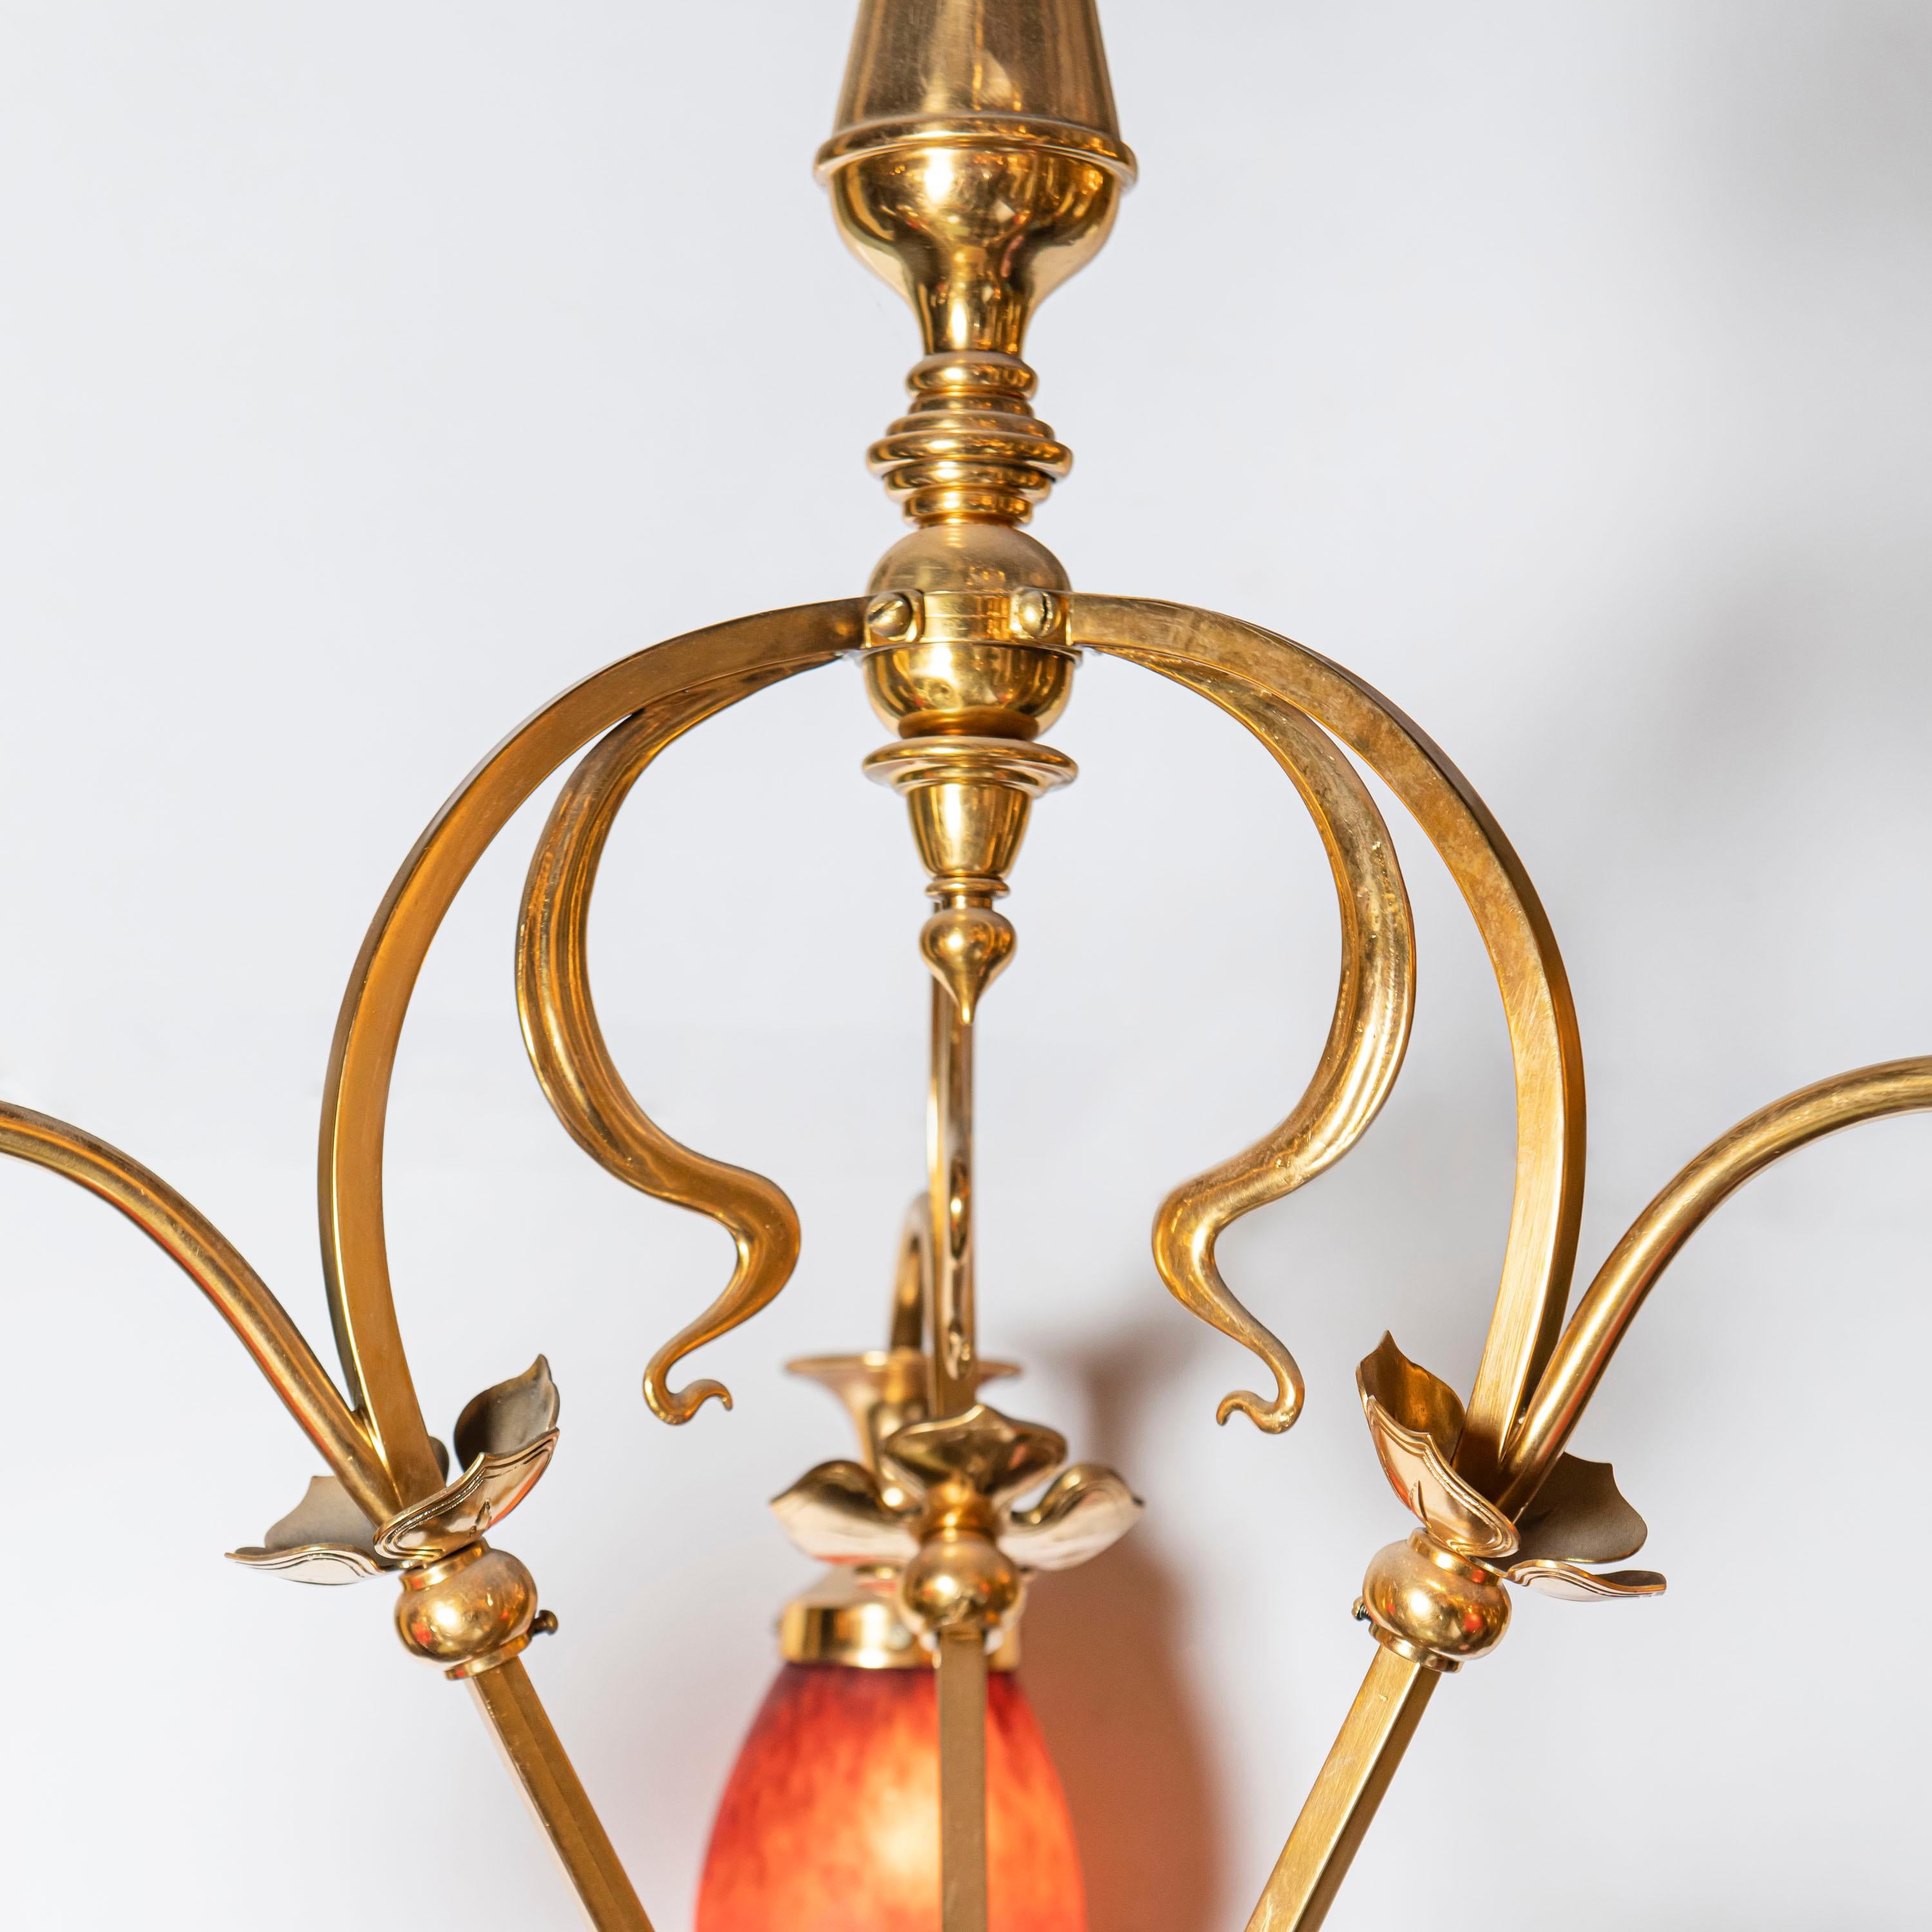 Art Nouveau Bronze and Artistic Glass Chandelier, France, Early 20th Century For Sale